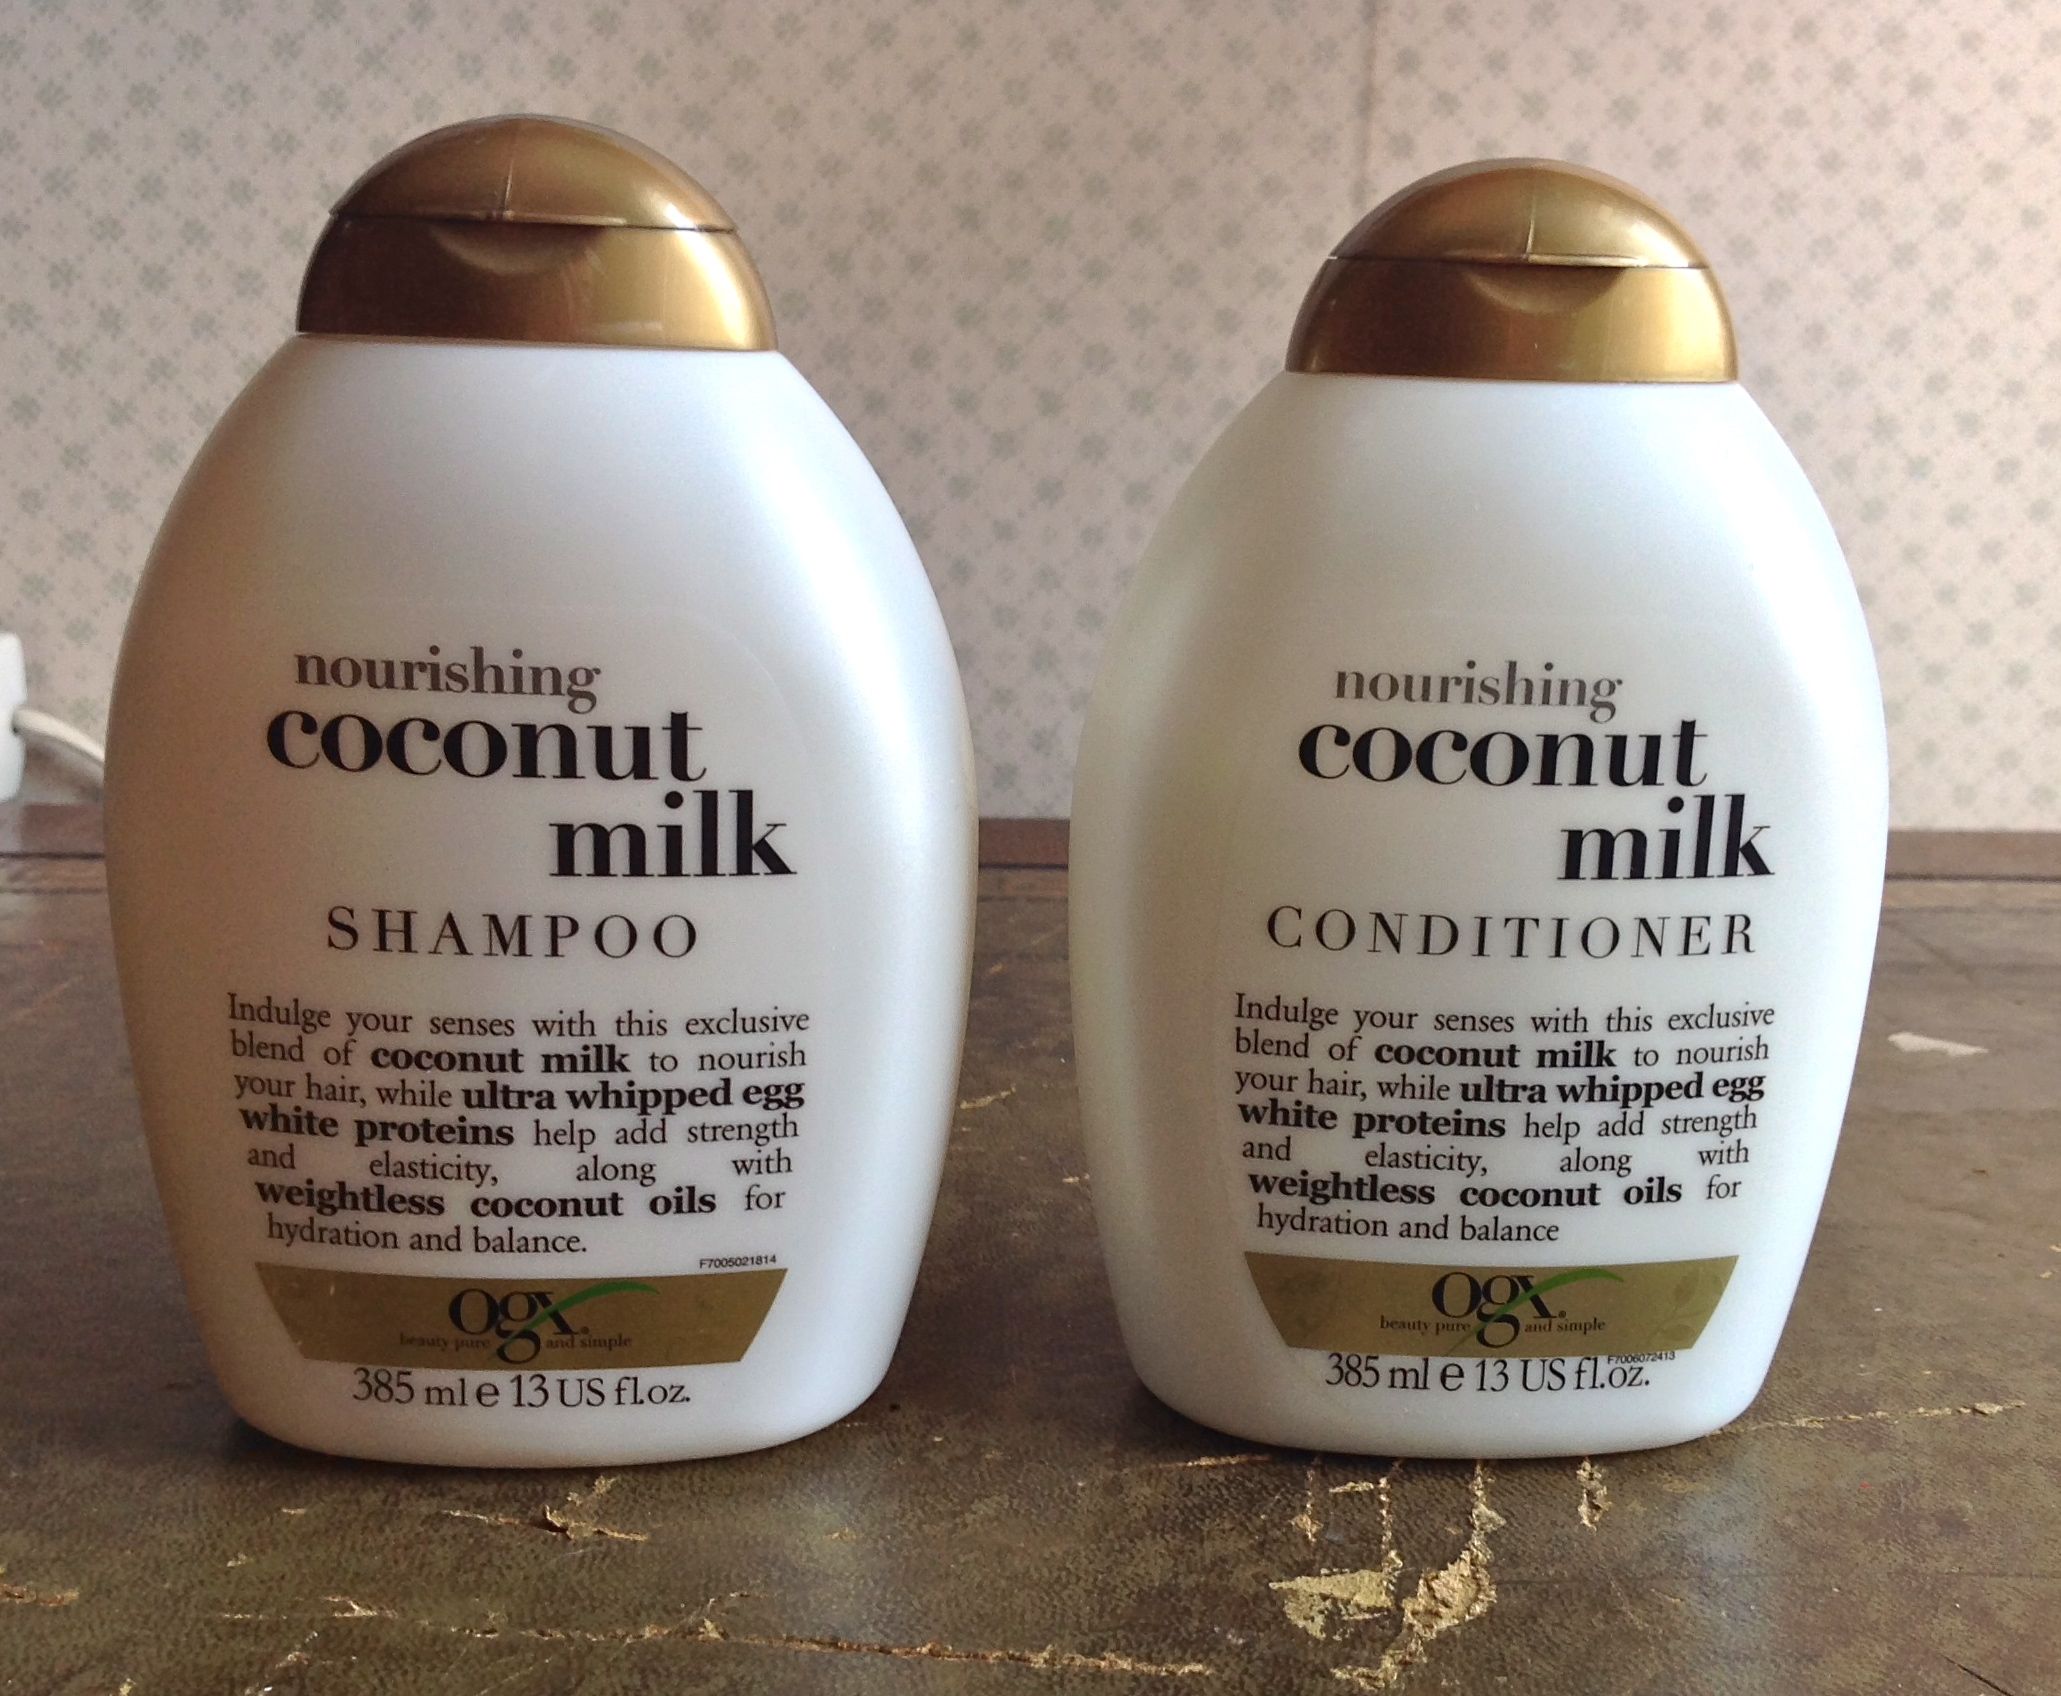 ogx coconut milk shampoo and conditioner reviews